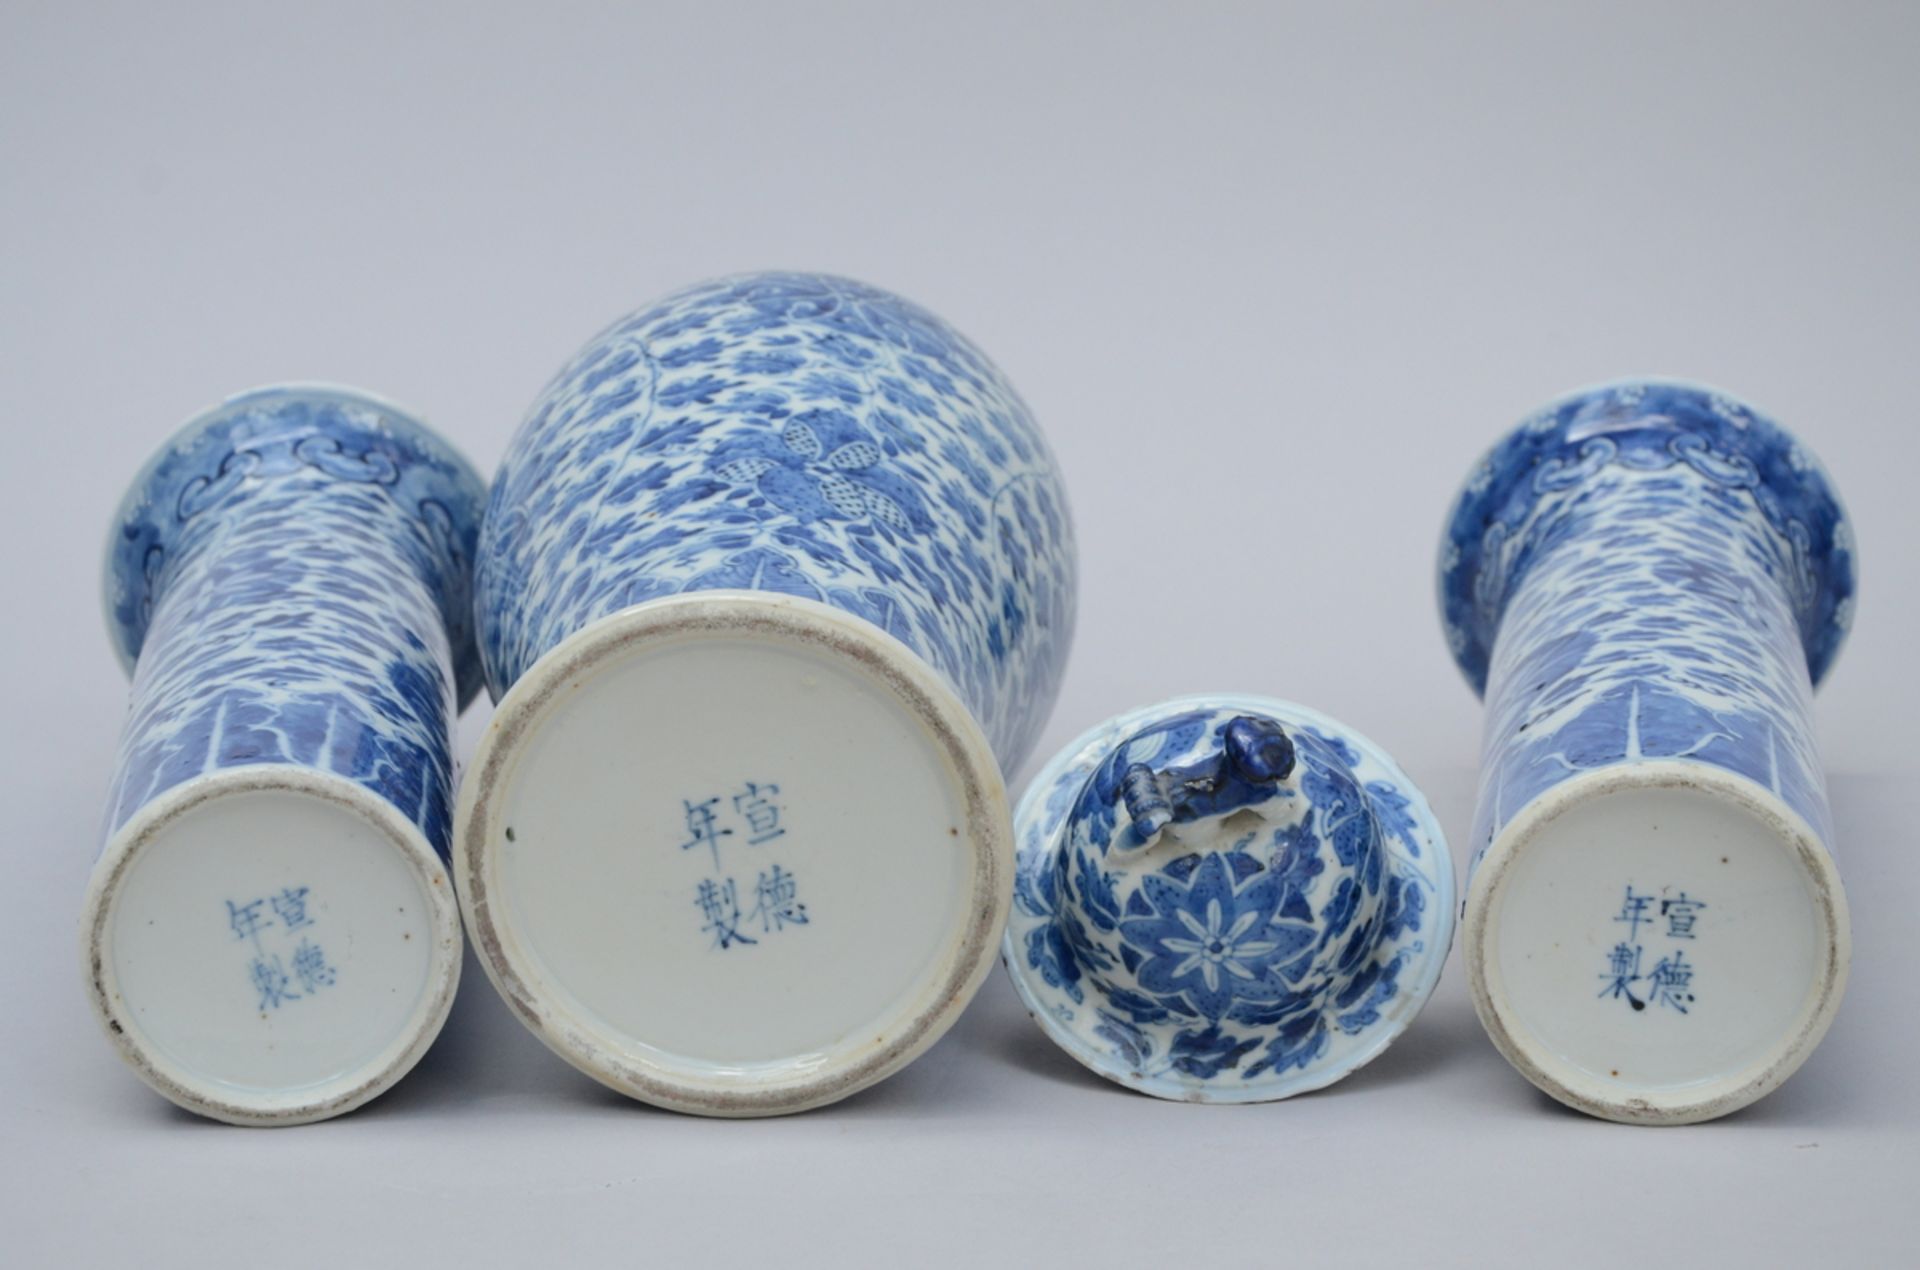 Three vases in Chinese blue and white porcelain, 19th century (h40cm and h30cm) (*) - Image 4 of 5